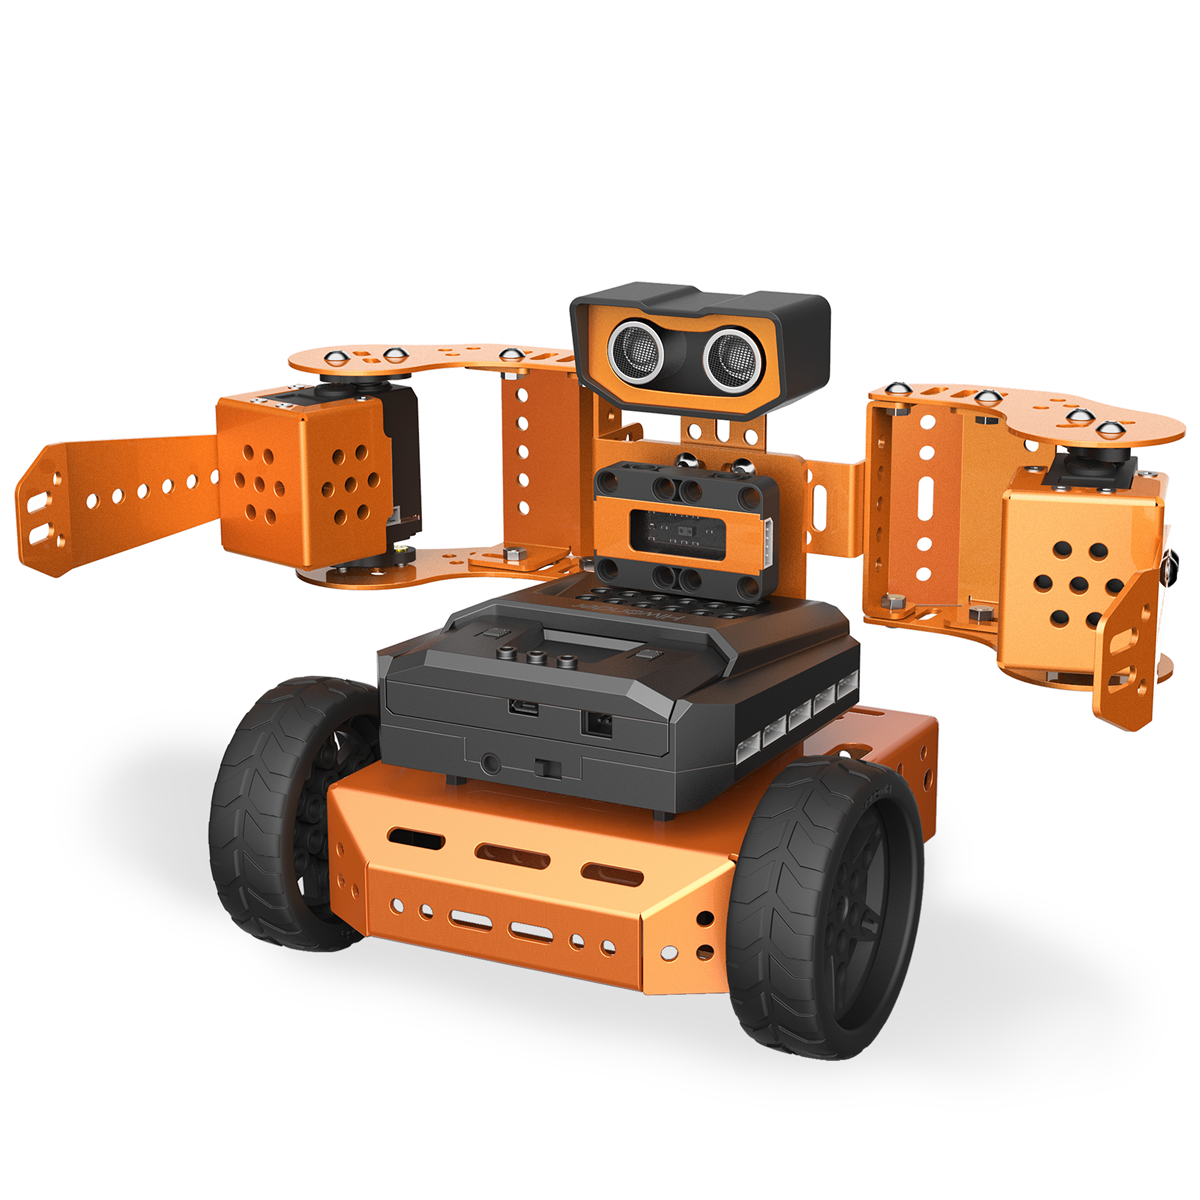 Qdee: The Best micro:bit Programmable Robot Kit with Infinite Configurations